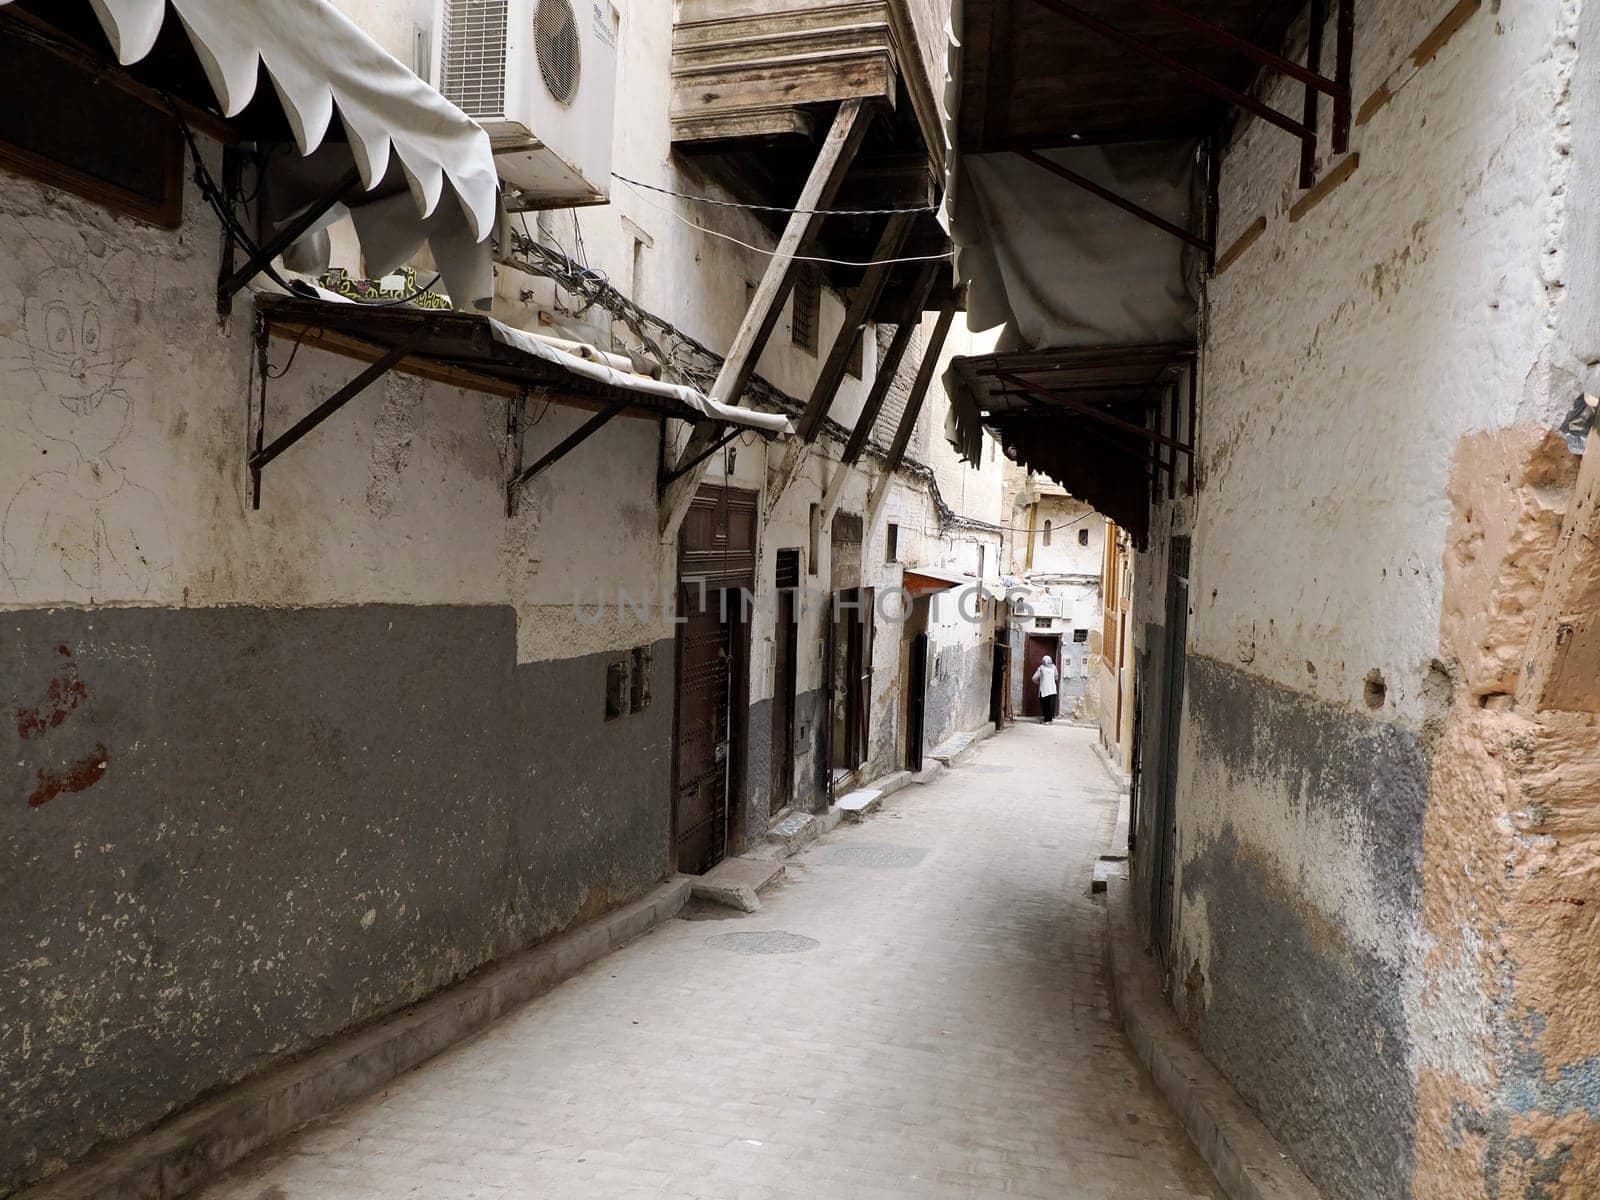 A Small street in Fez Fes medieval medina (old town). Morocco.